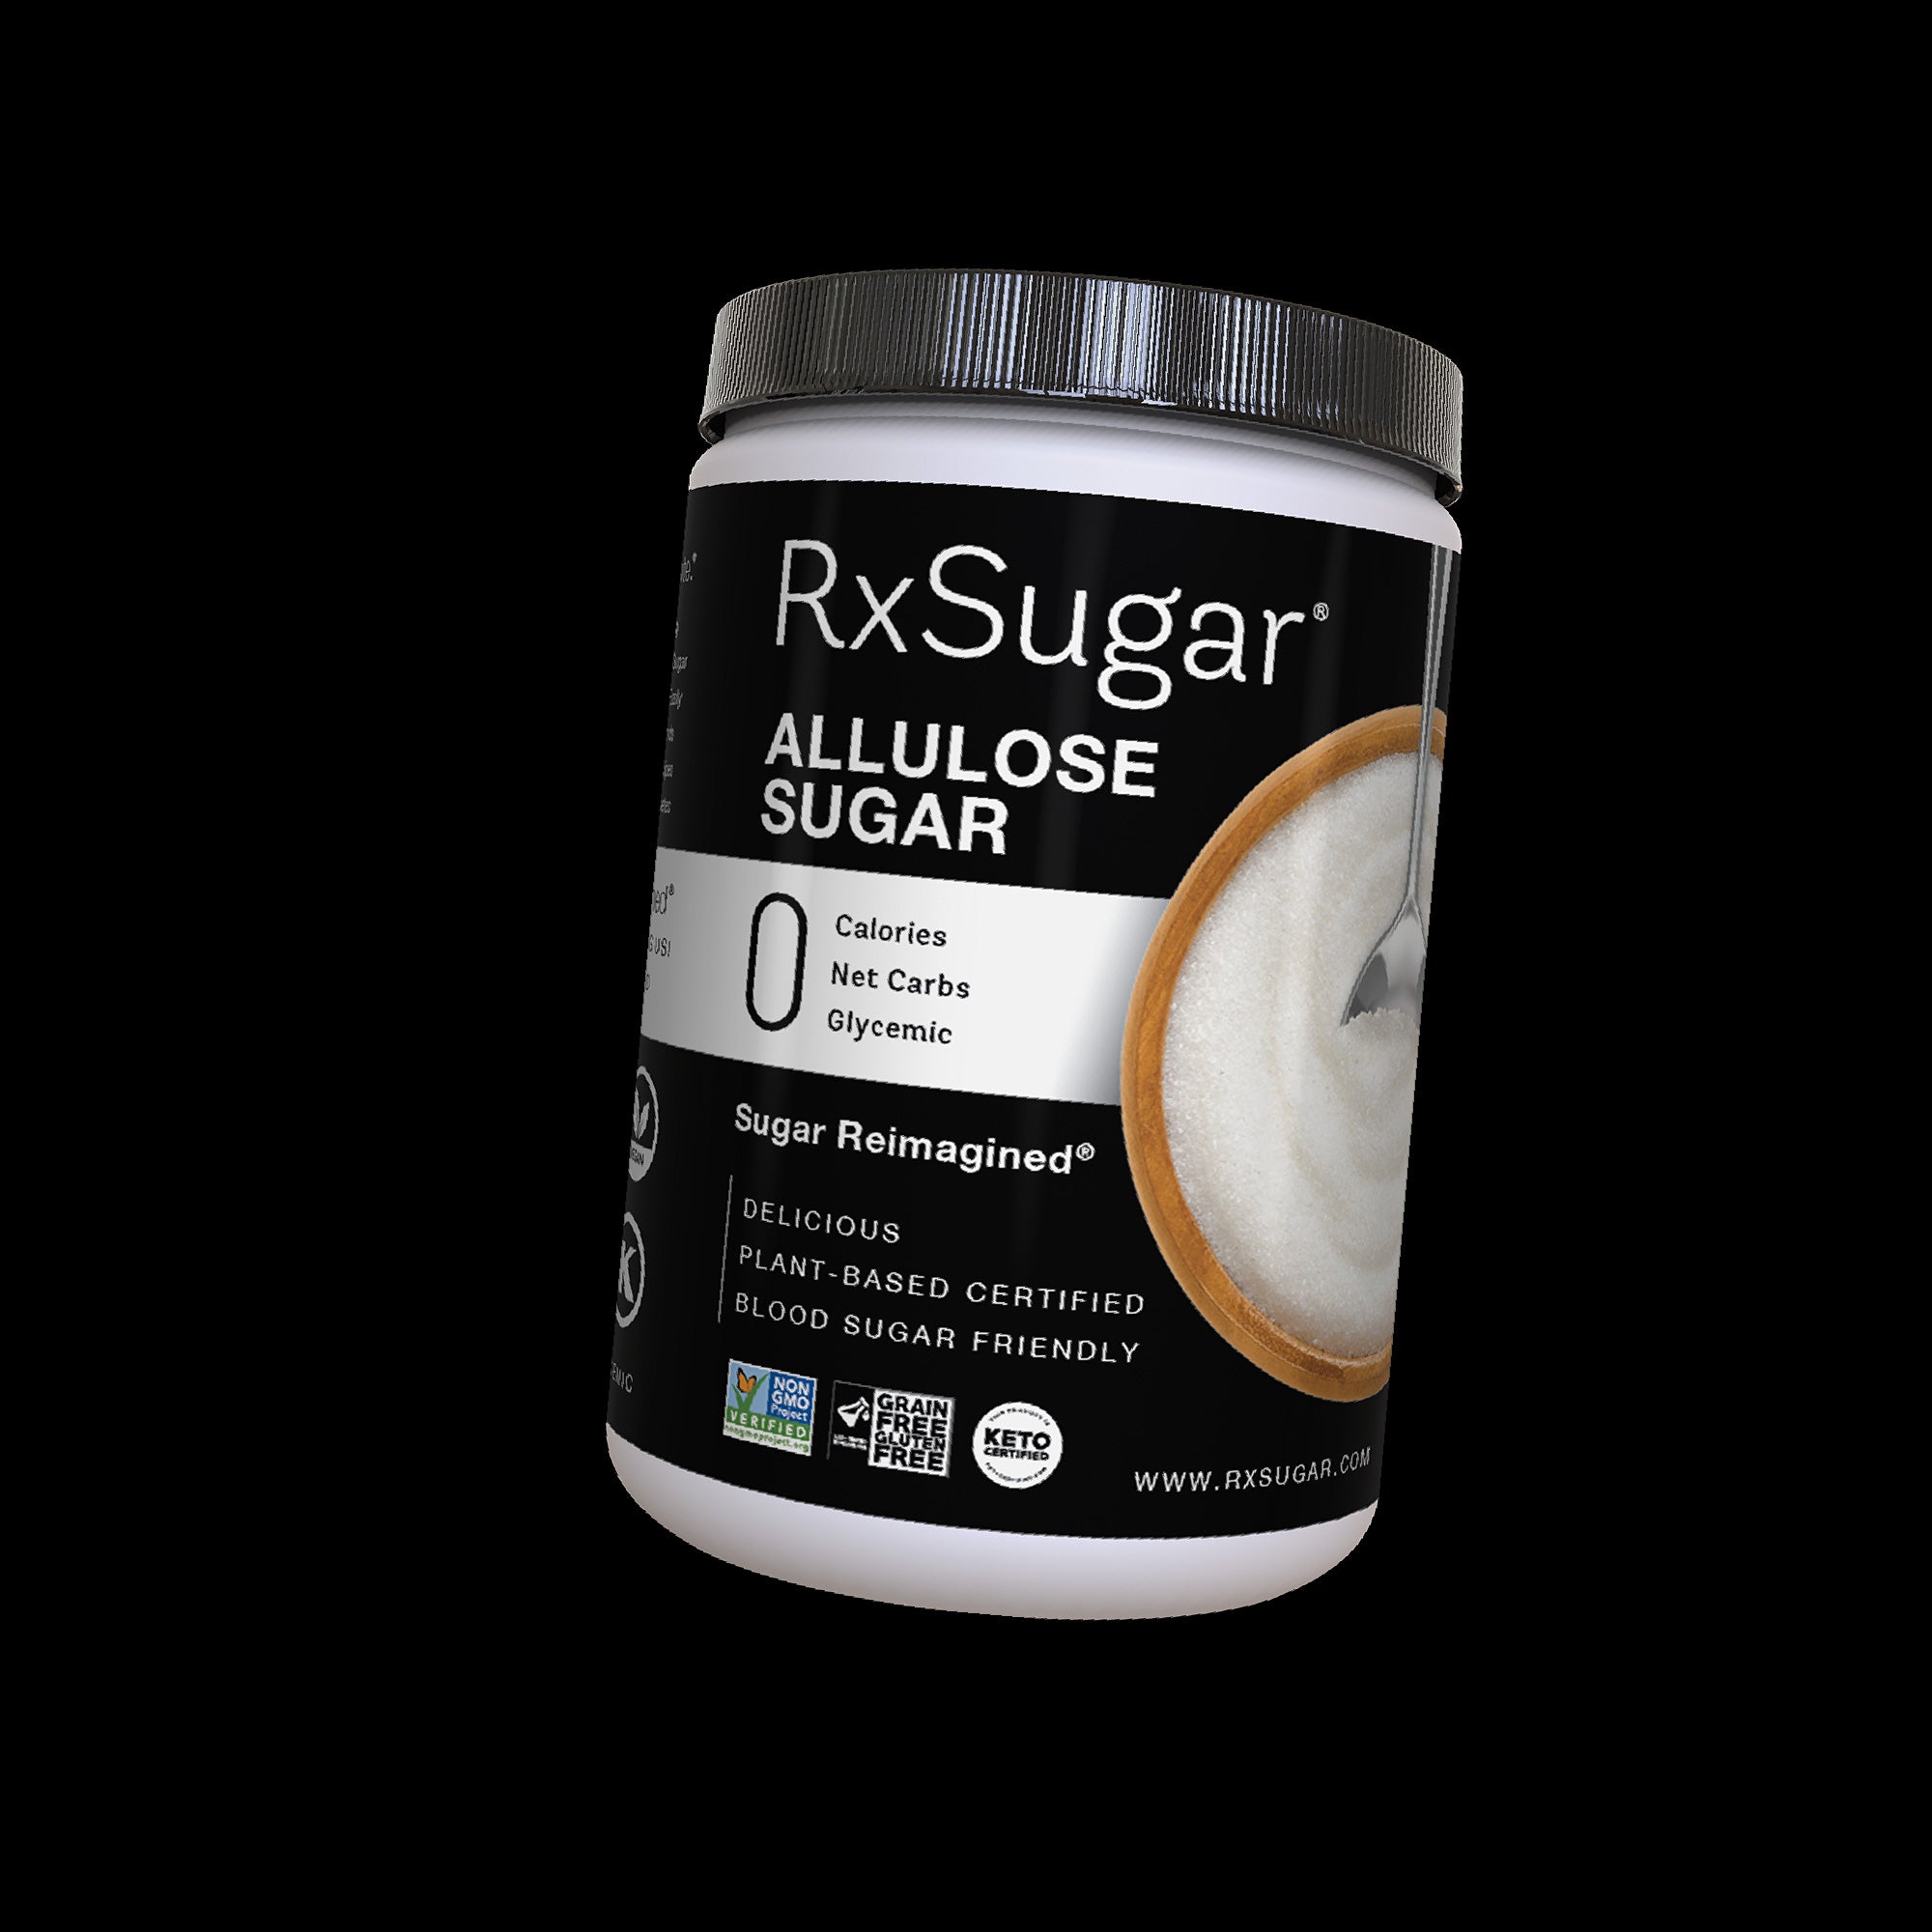 RxSugar canister 1 pound of allulose container